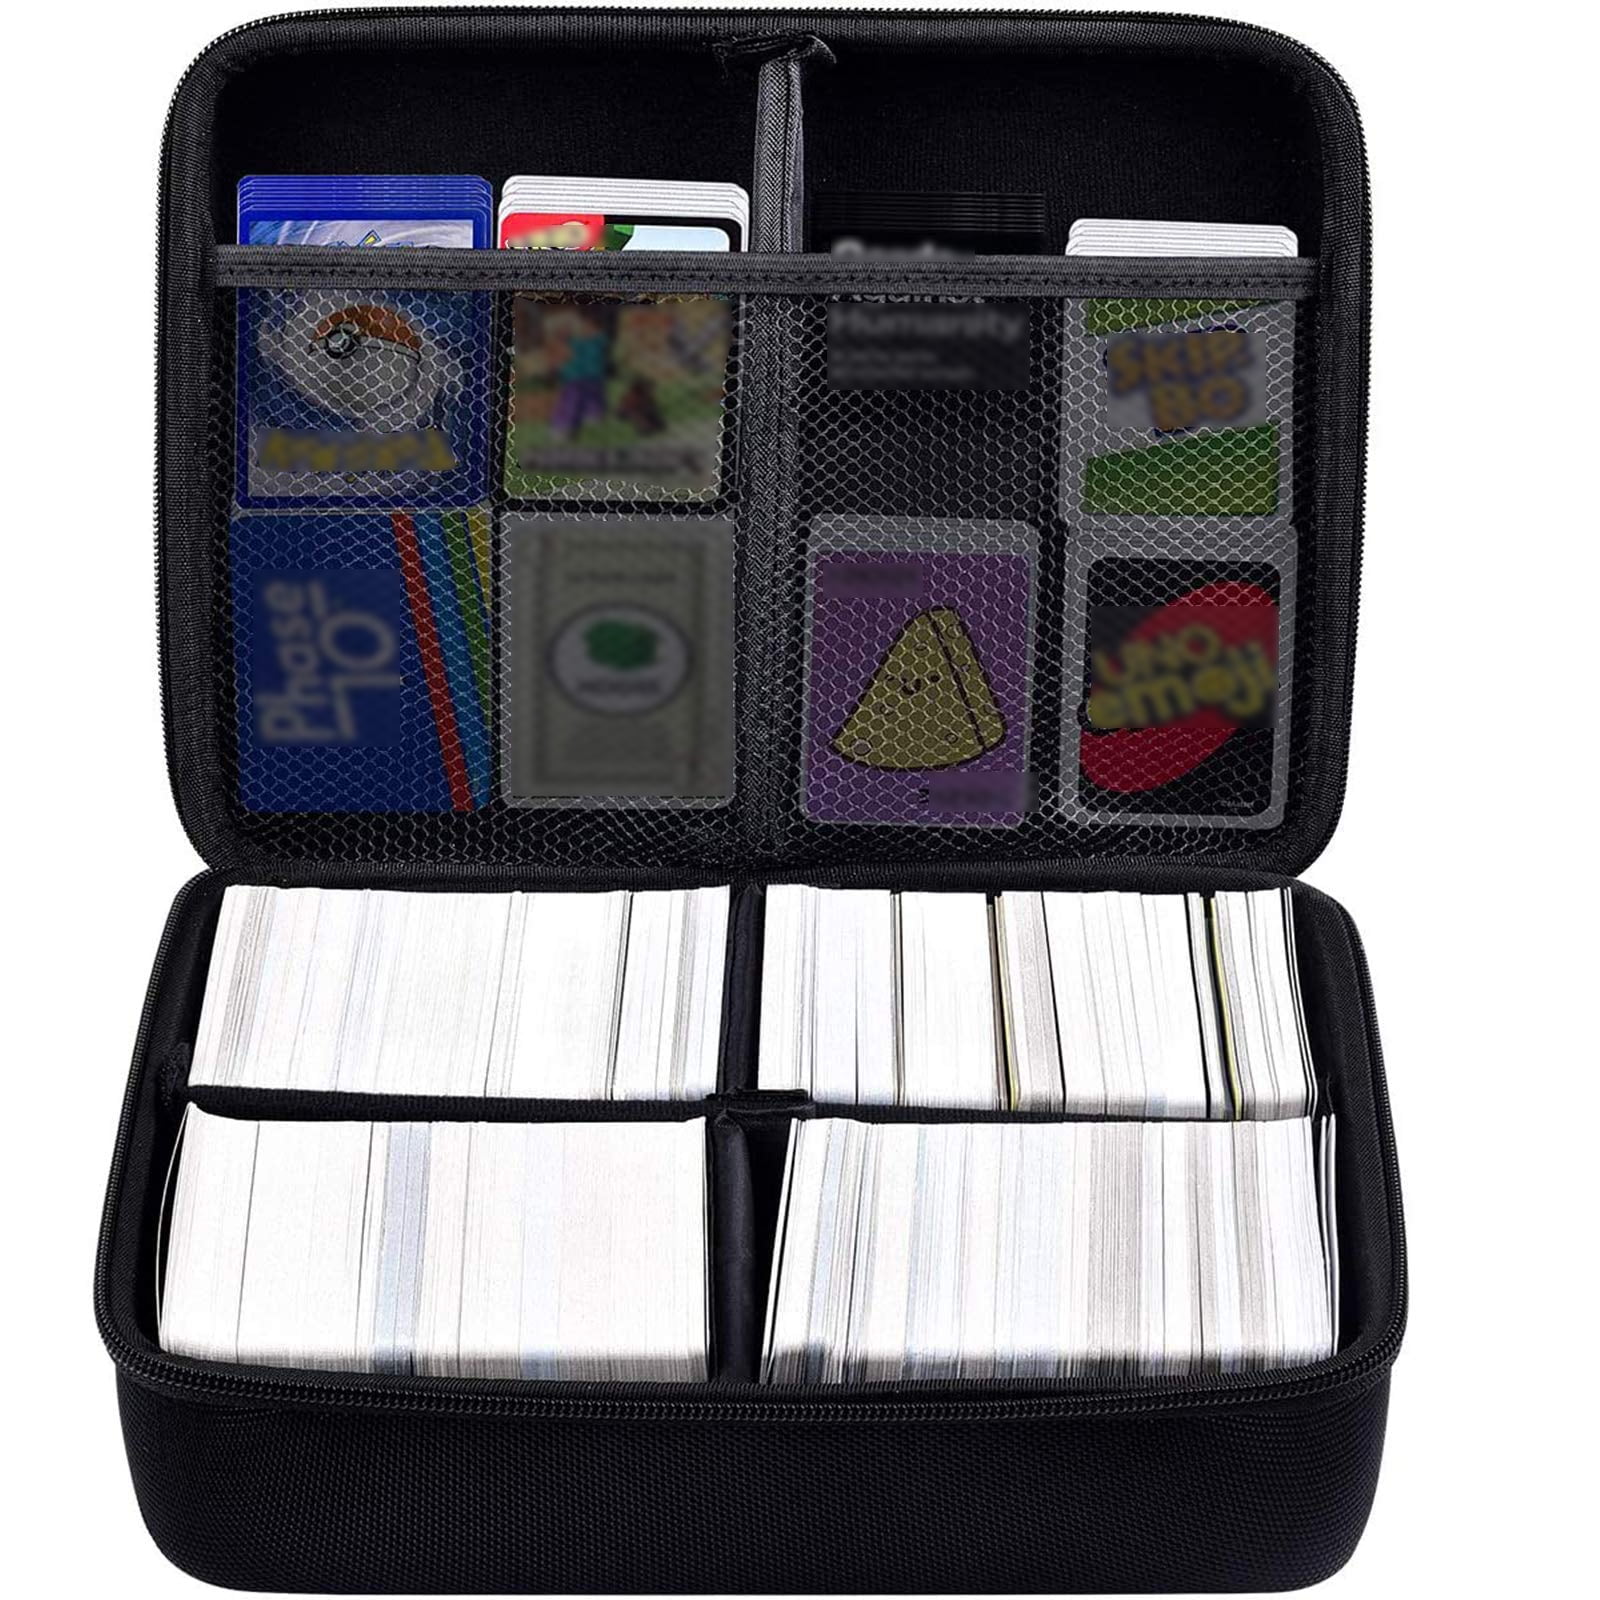 Card Game A H Fits The Main Game Space for 1950 Cards - Card Game Sold Separately. Hermitshell Extra Large Hard EVA Travel Case for C 